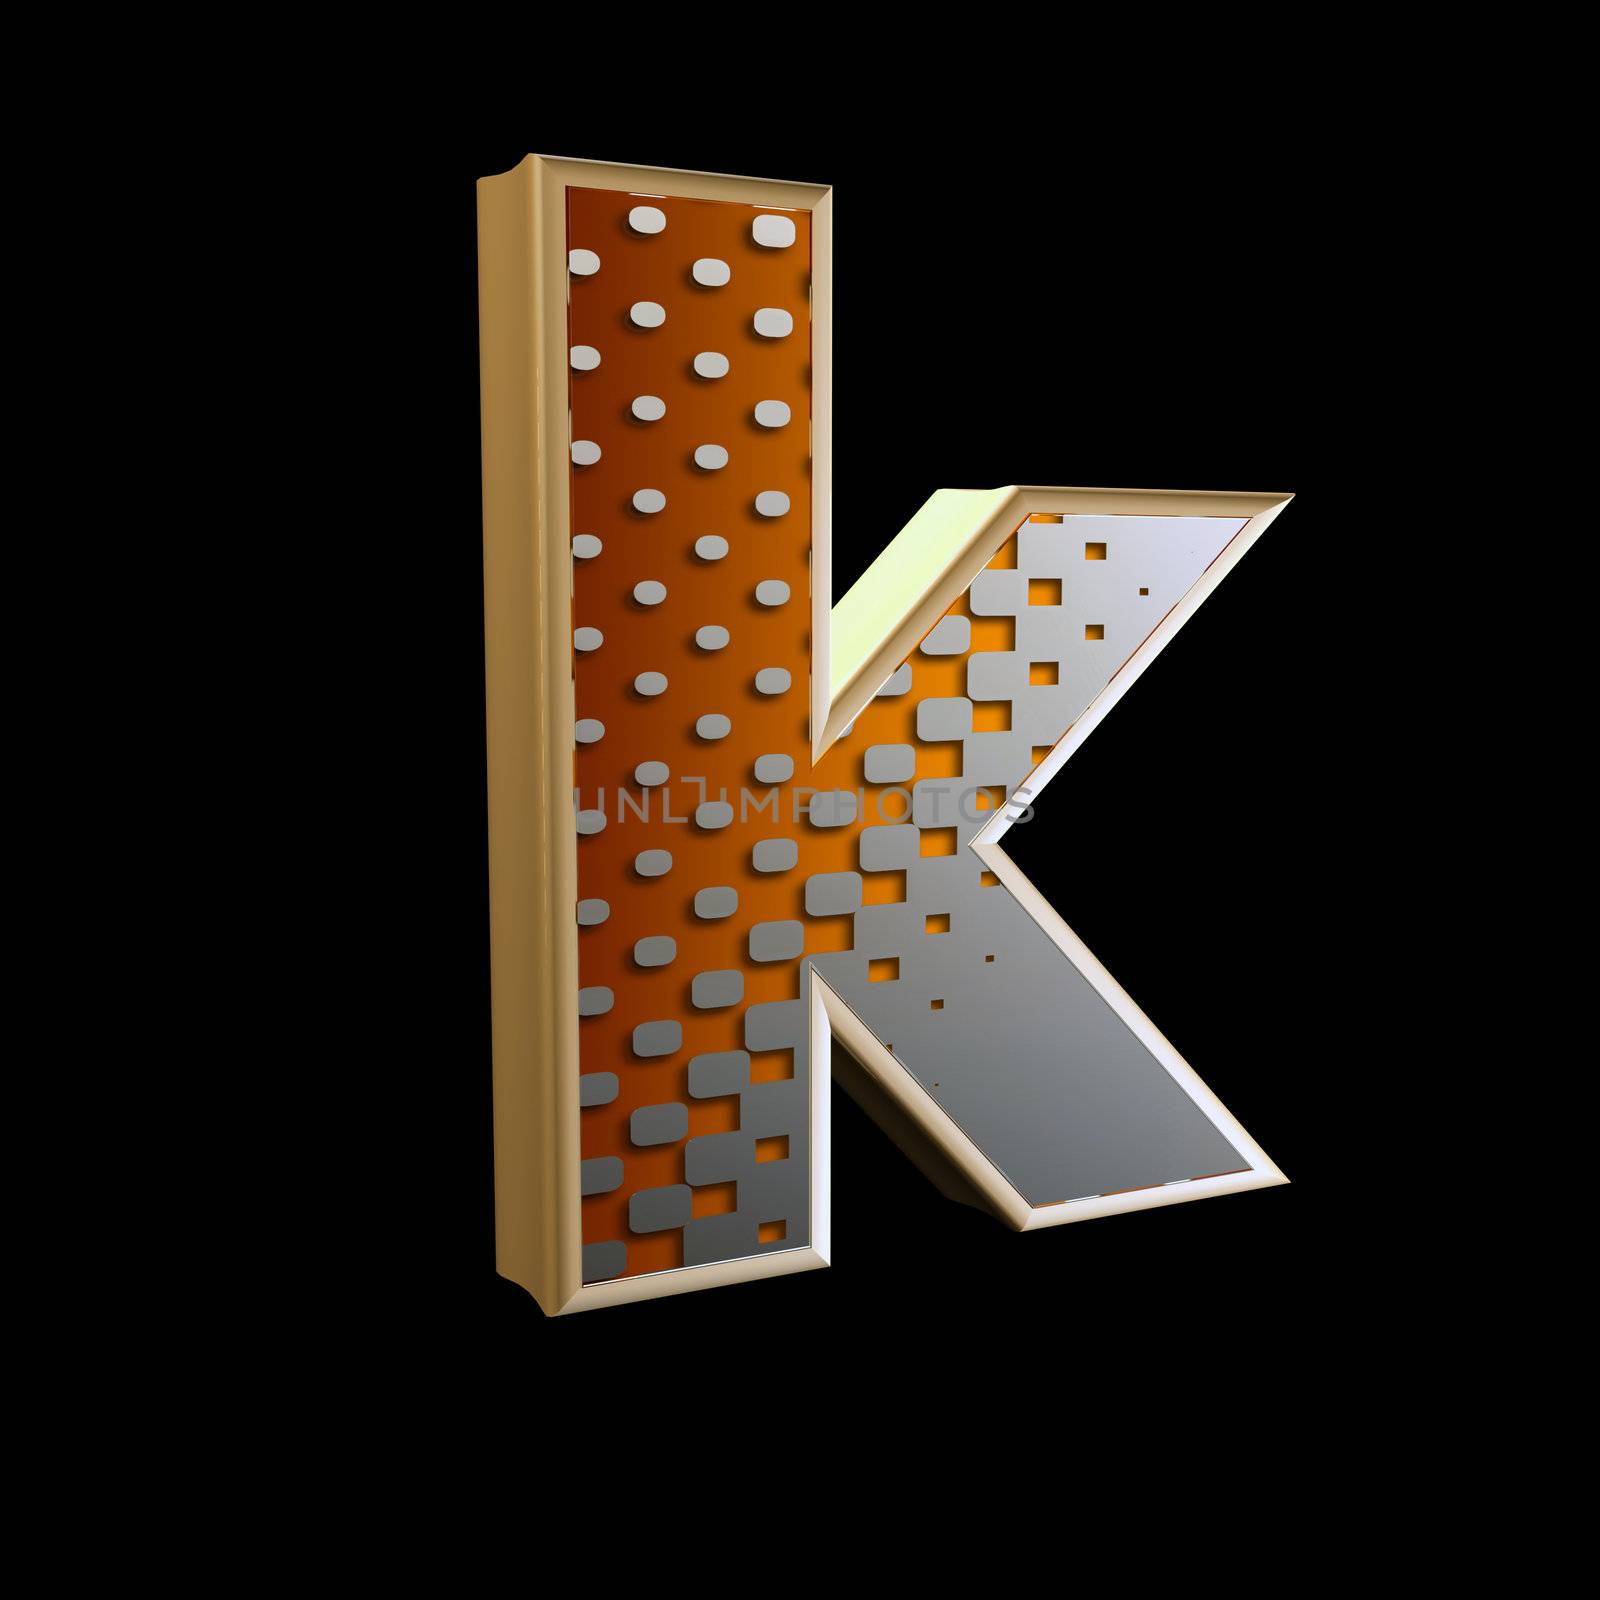 abstract 3d letter with halftone texture - k